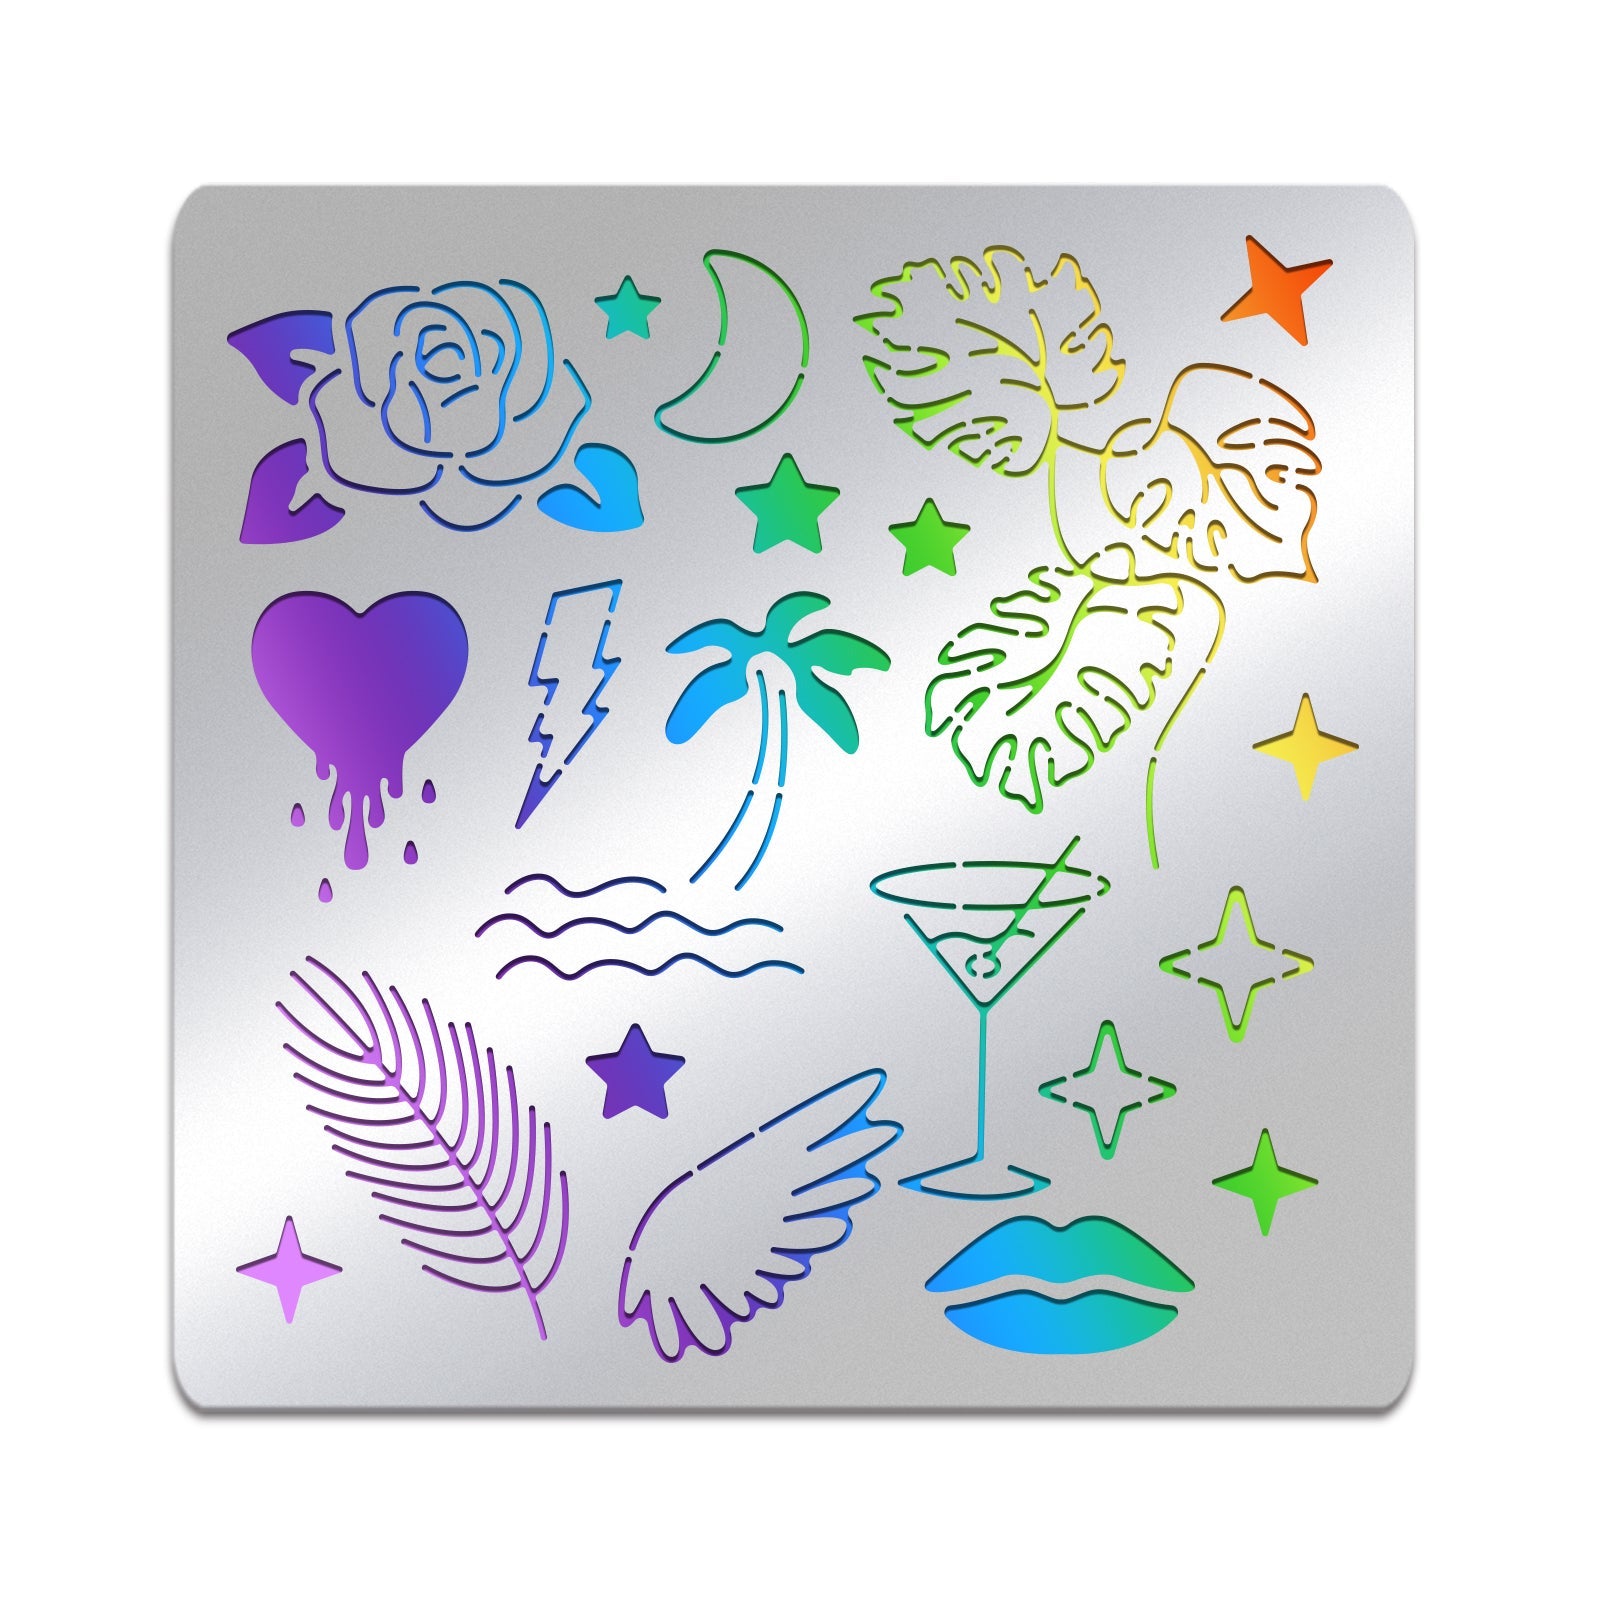 CRASPIRE Neon Light Theme Stainless Steel Cutting Dies Stencils, for DIY Scrapbooking/Photo Album, Decorative Embossing DIY Paper Card, Matte Stainless Steel Color, Melting Heart & Wing & Drink, Mixed Patterns, 156x156mm